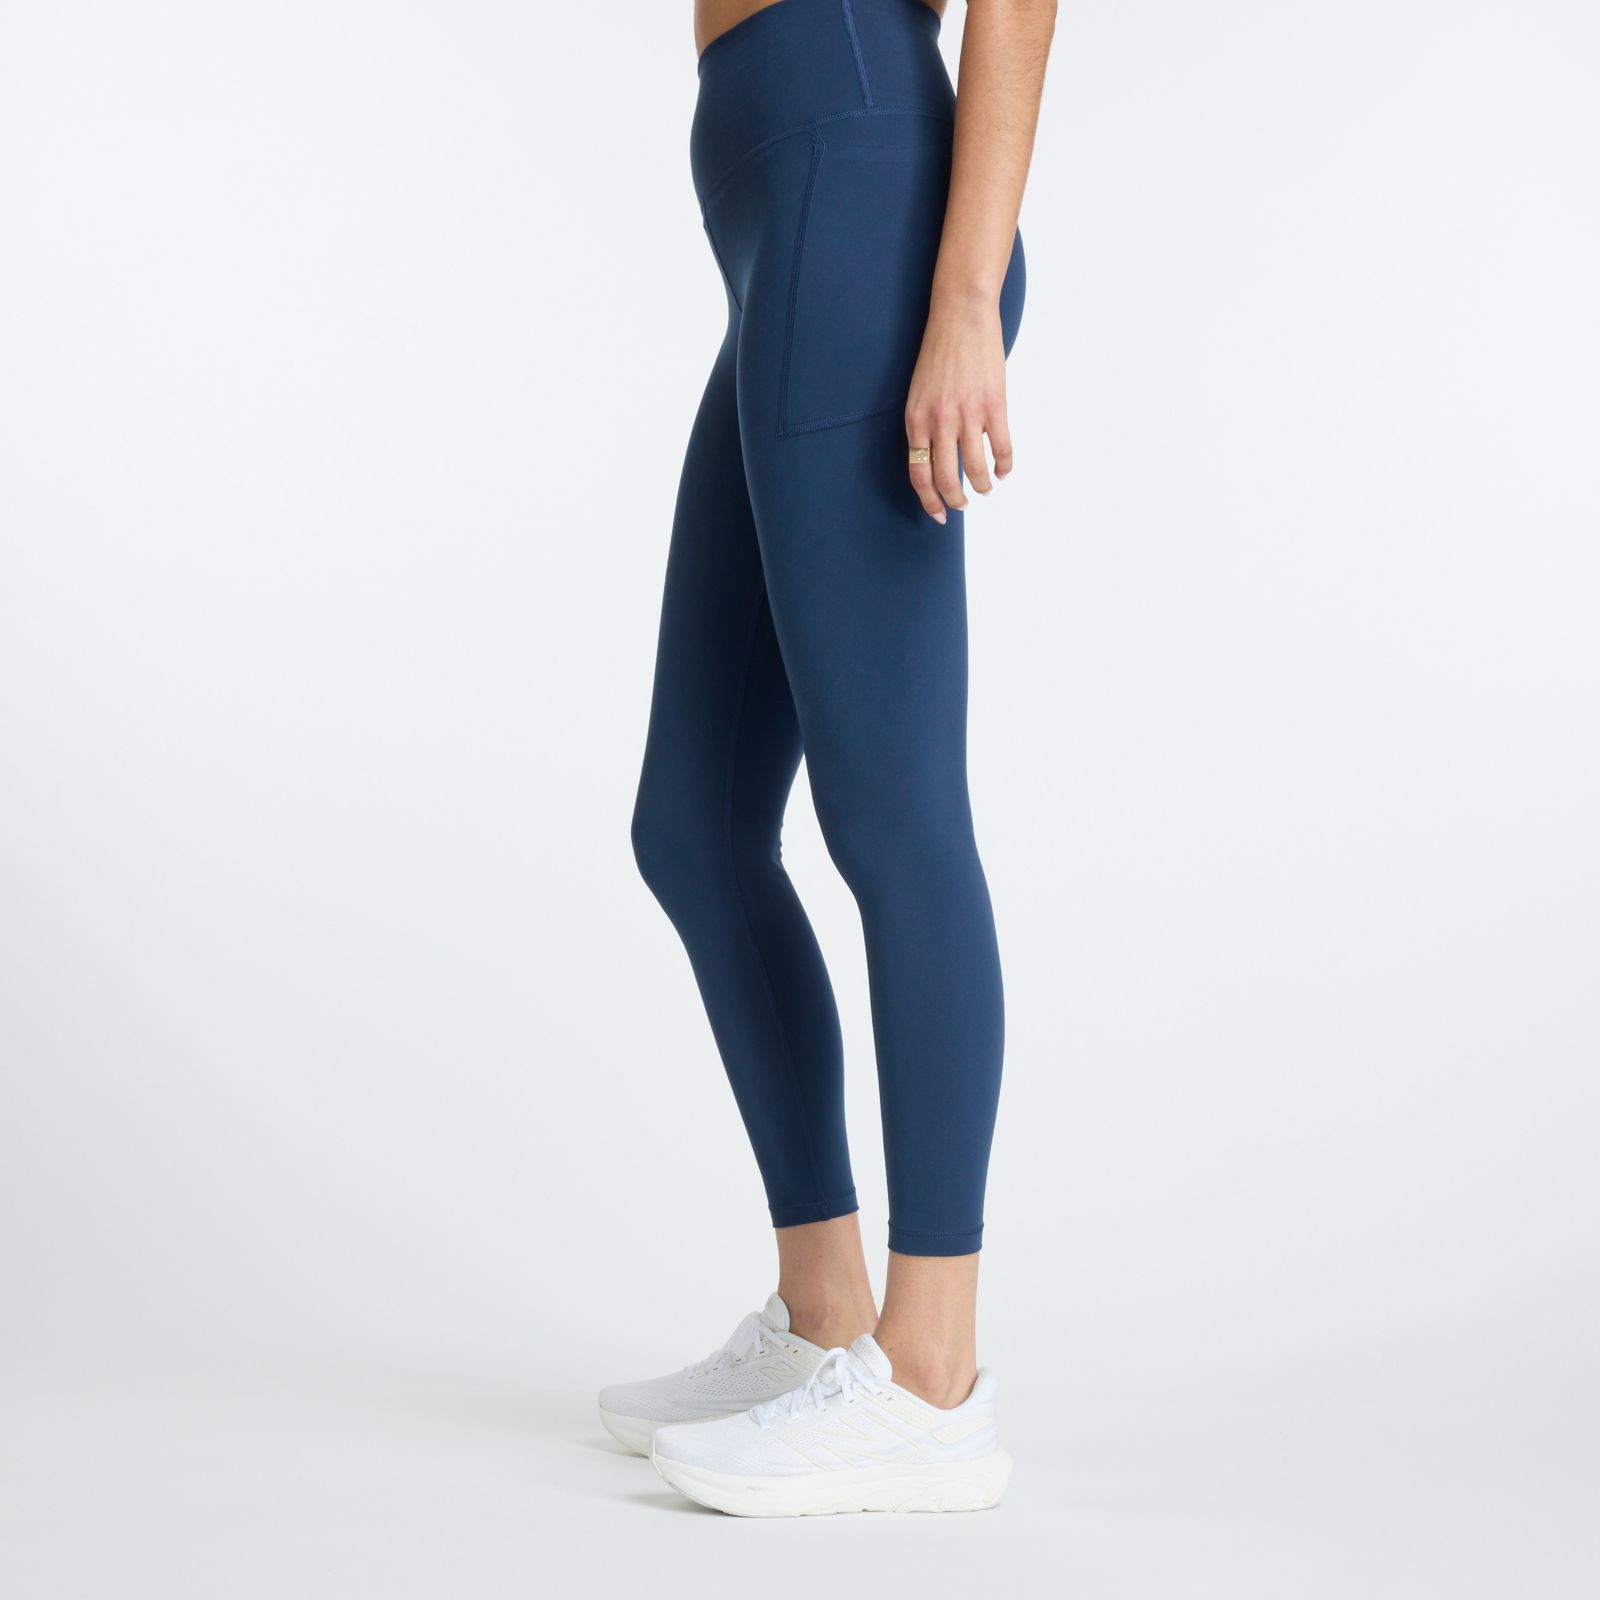 NB New Balance Women's High Rise Tight with Pocket workout leggings G5242